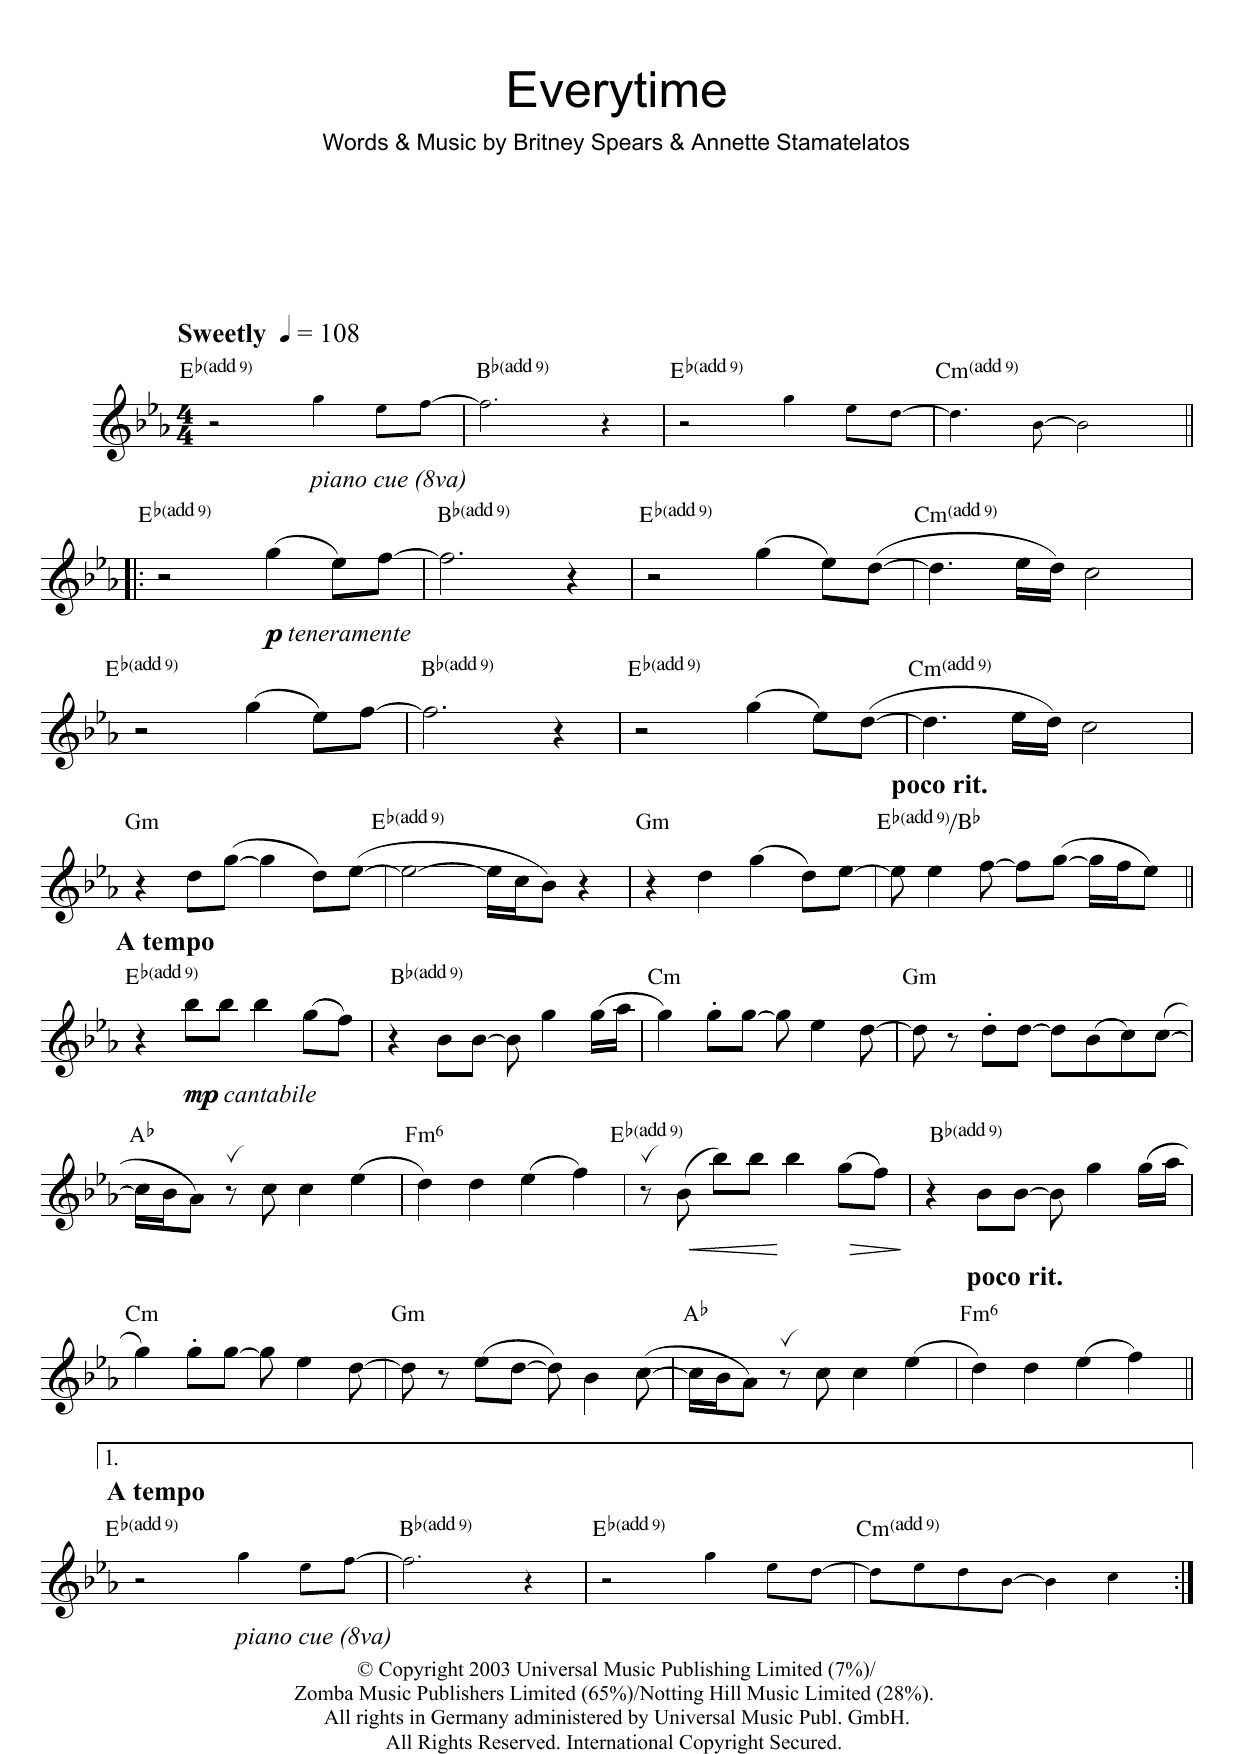 Download Britney Spears Everytime Sheet Music